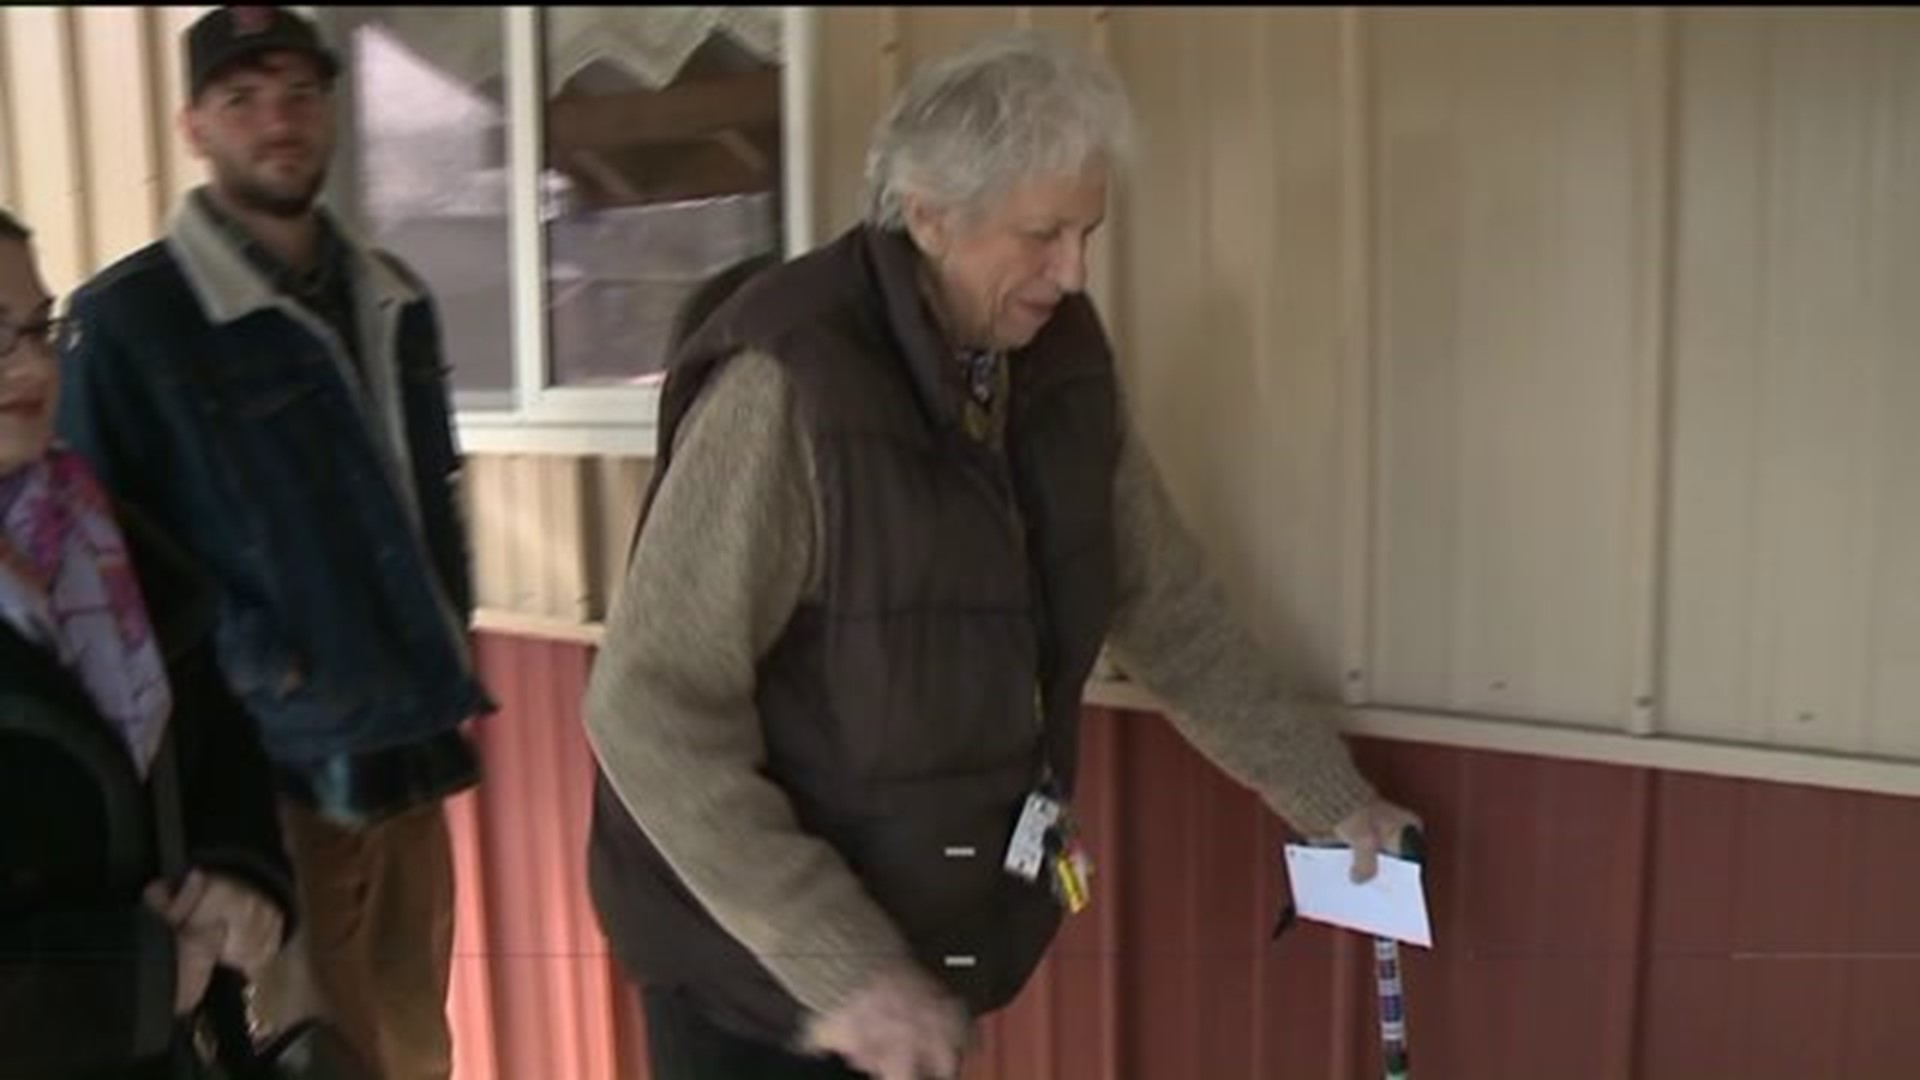 81-Year-Old Purse Snatching Victim Speaks Out